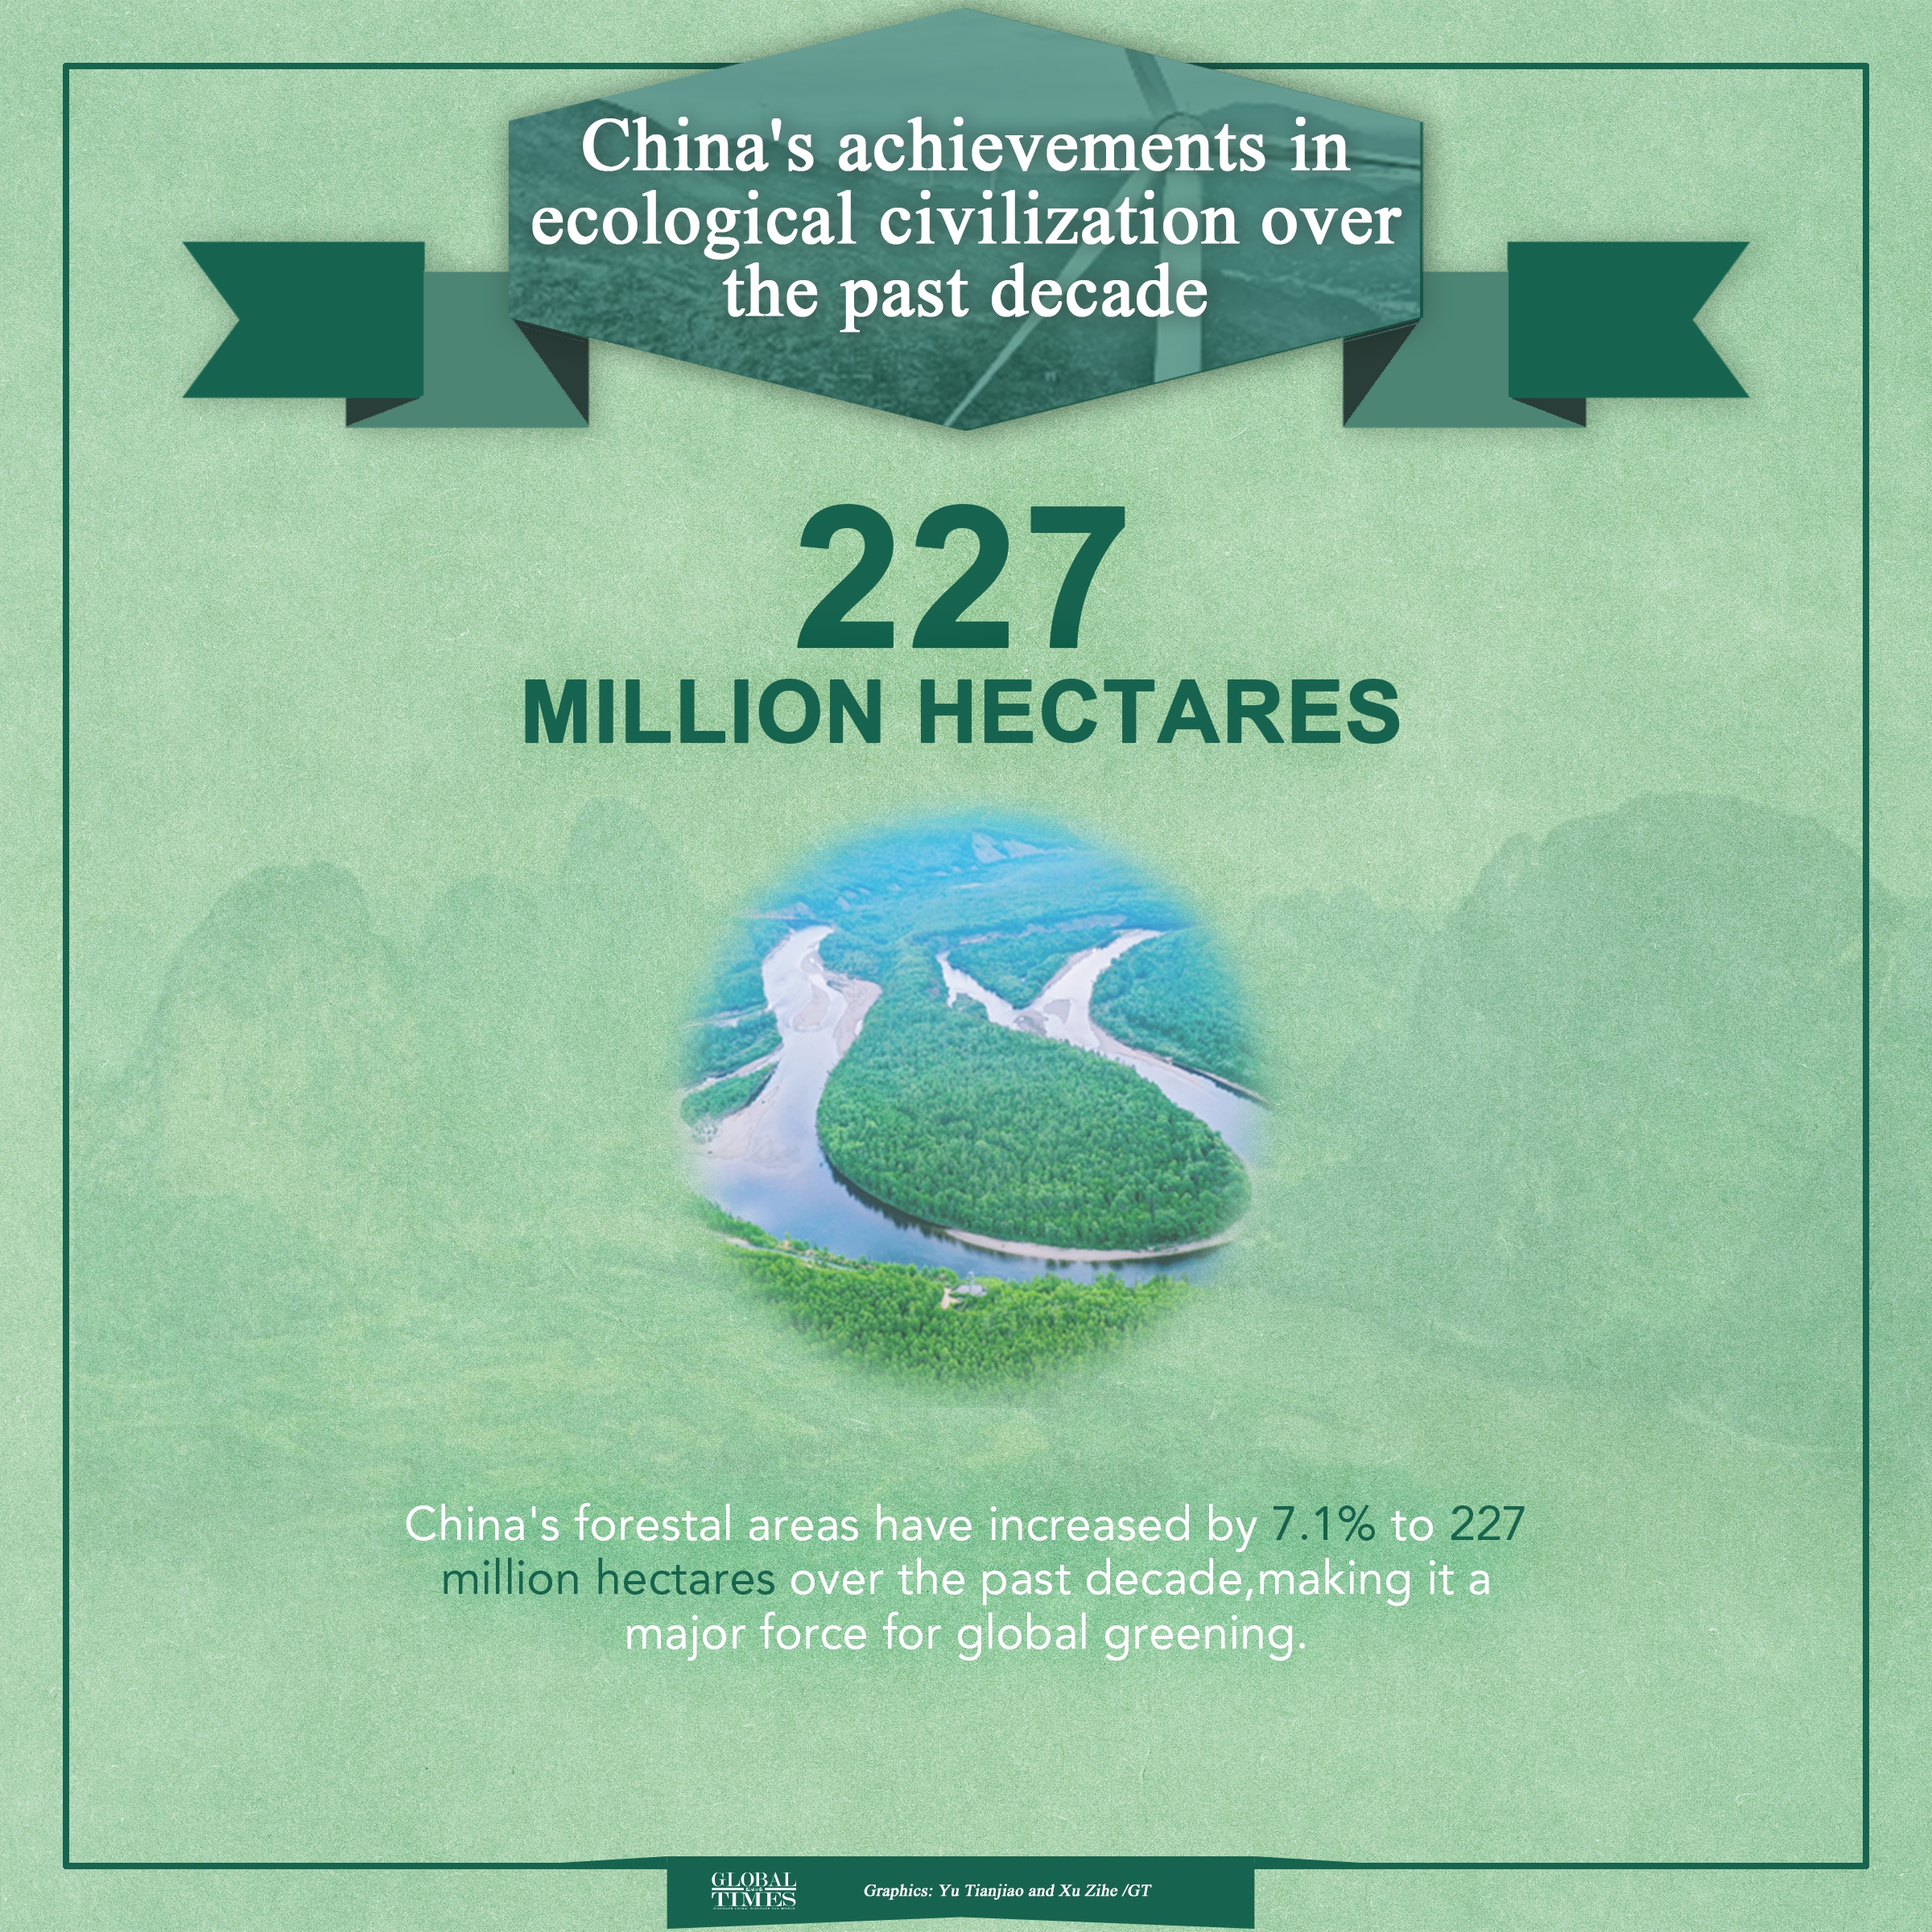 China's achievements in ecological civilization over the past decade